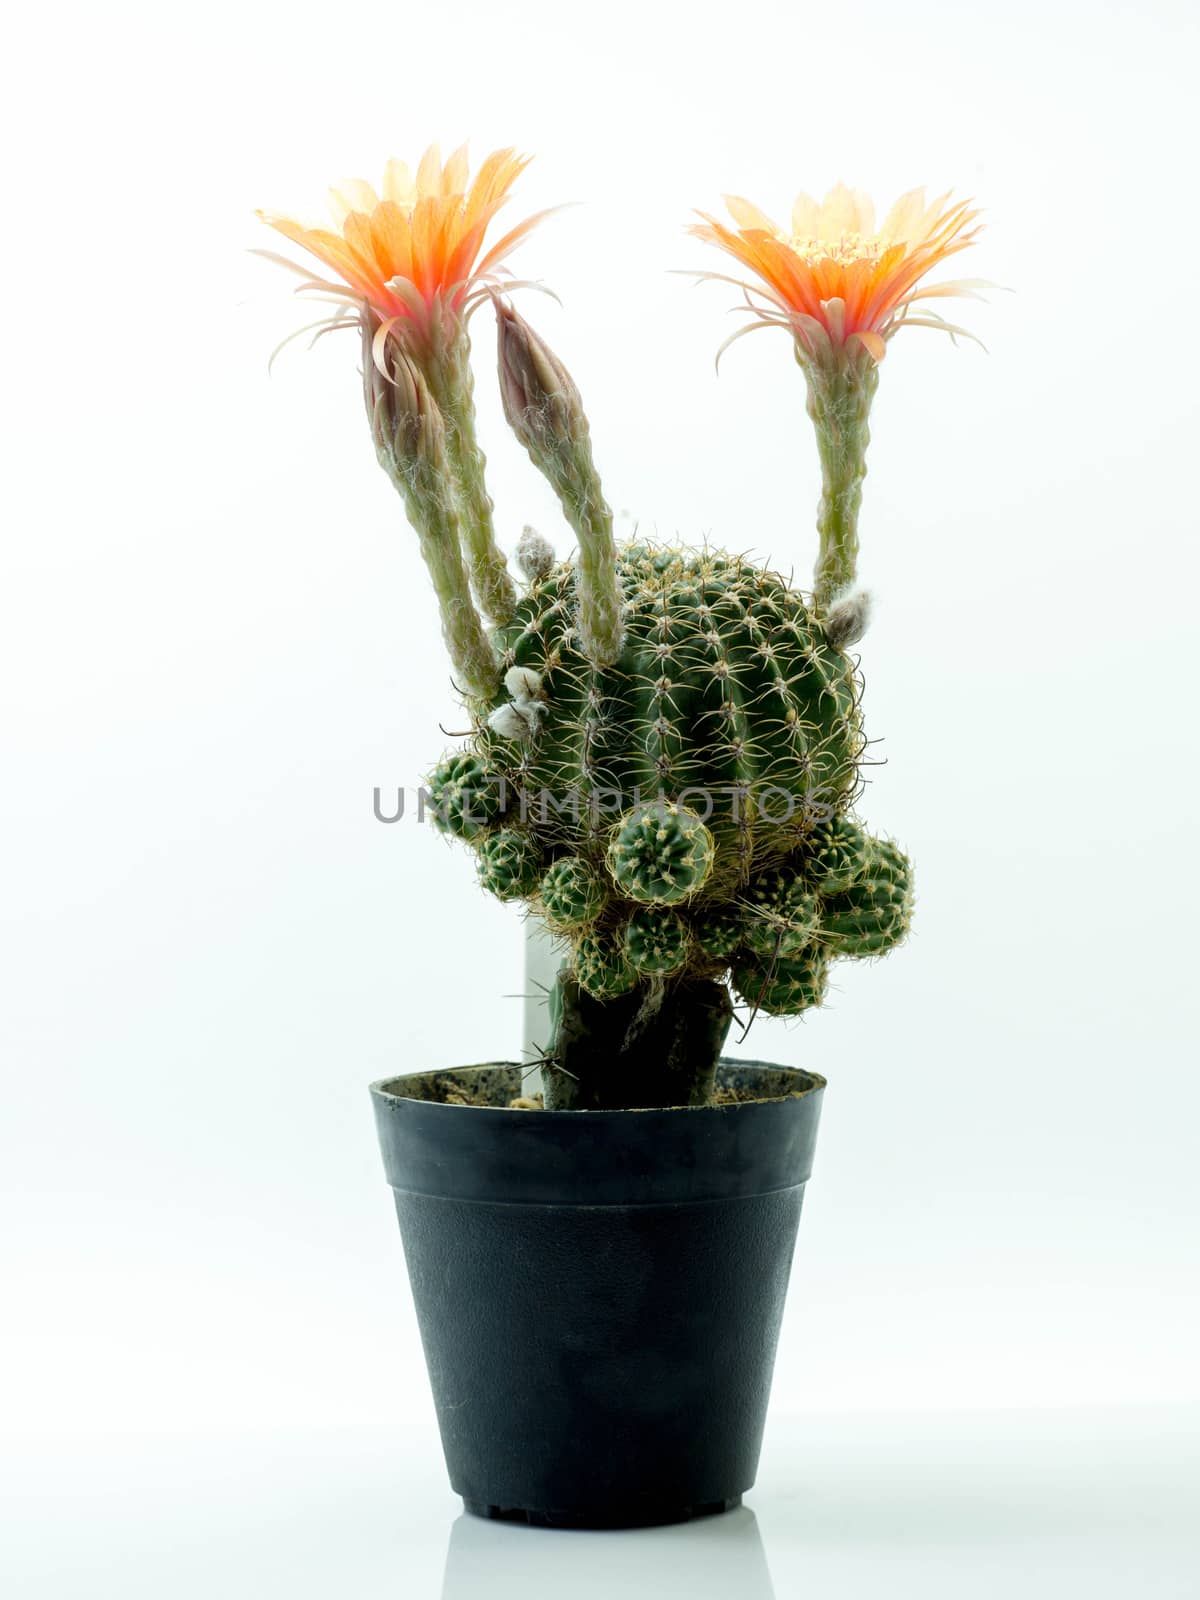 Cactus with Orange flower in a pot. Isolated on a white background.